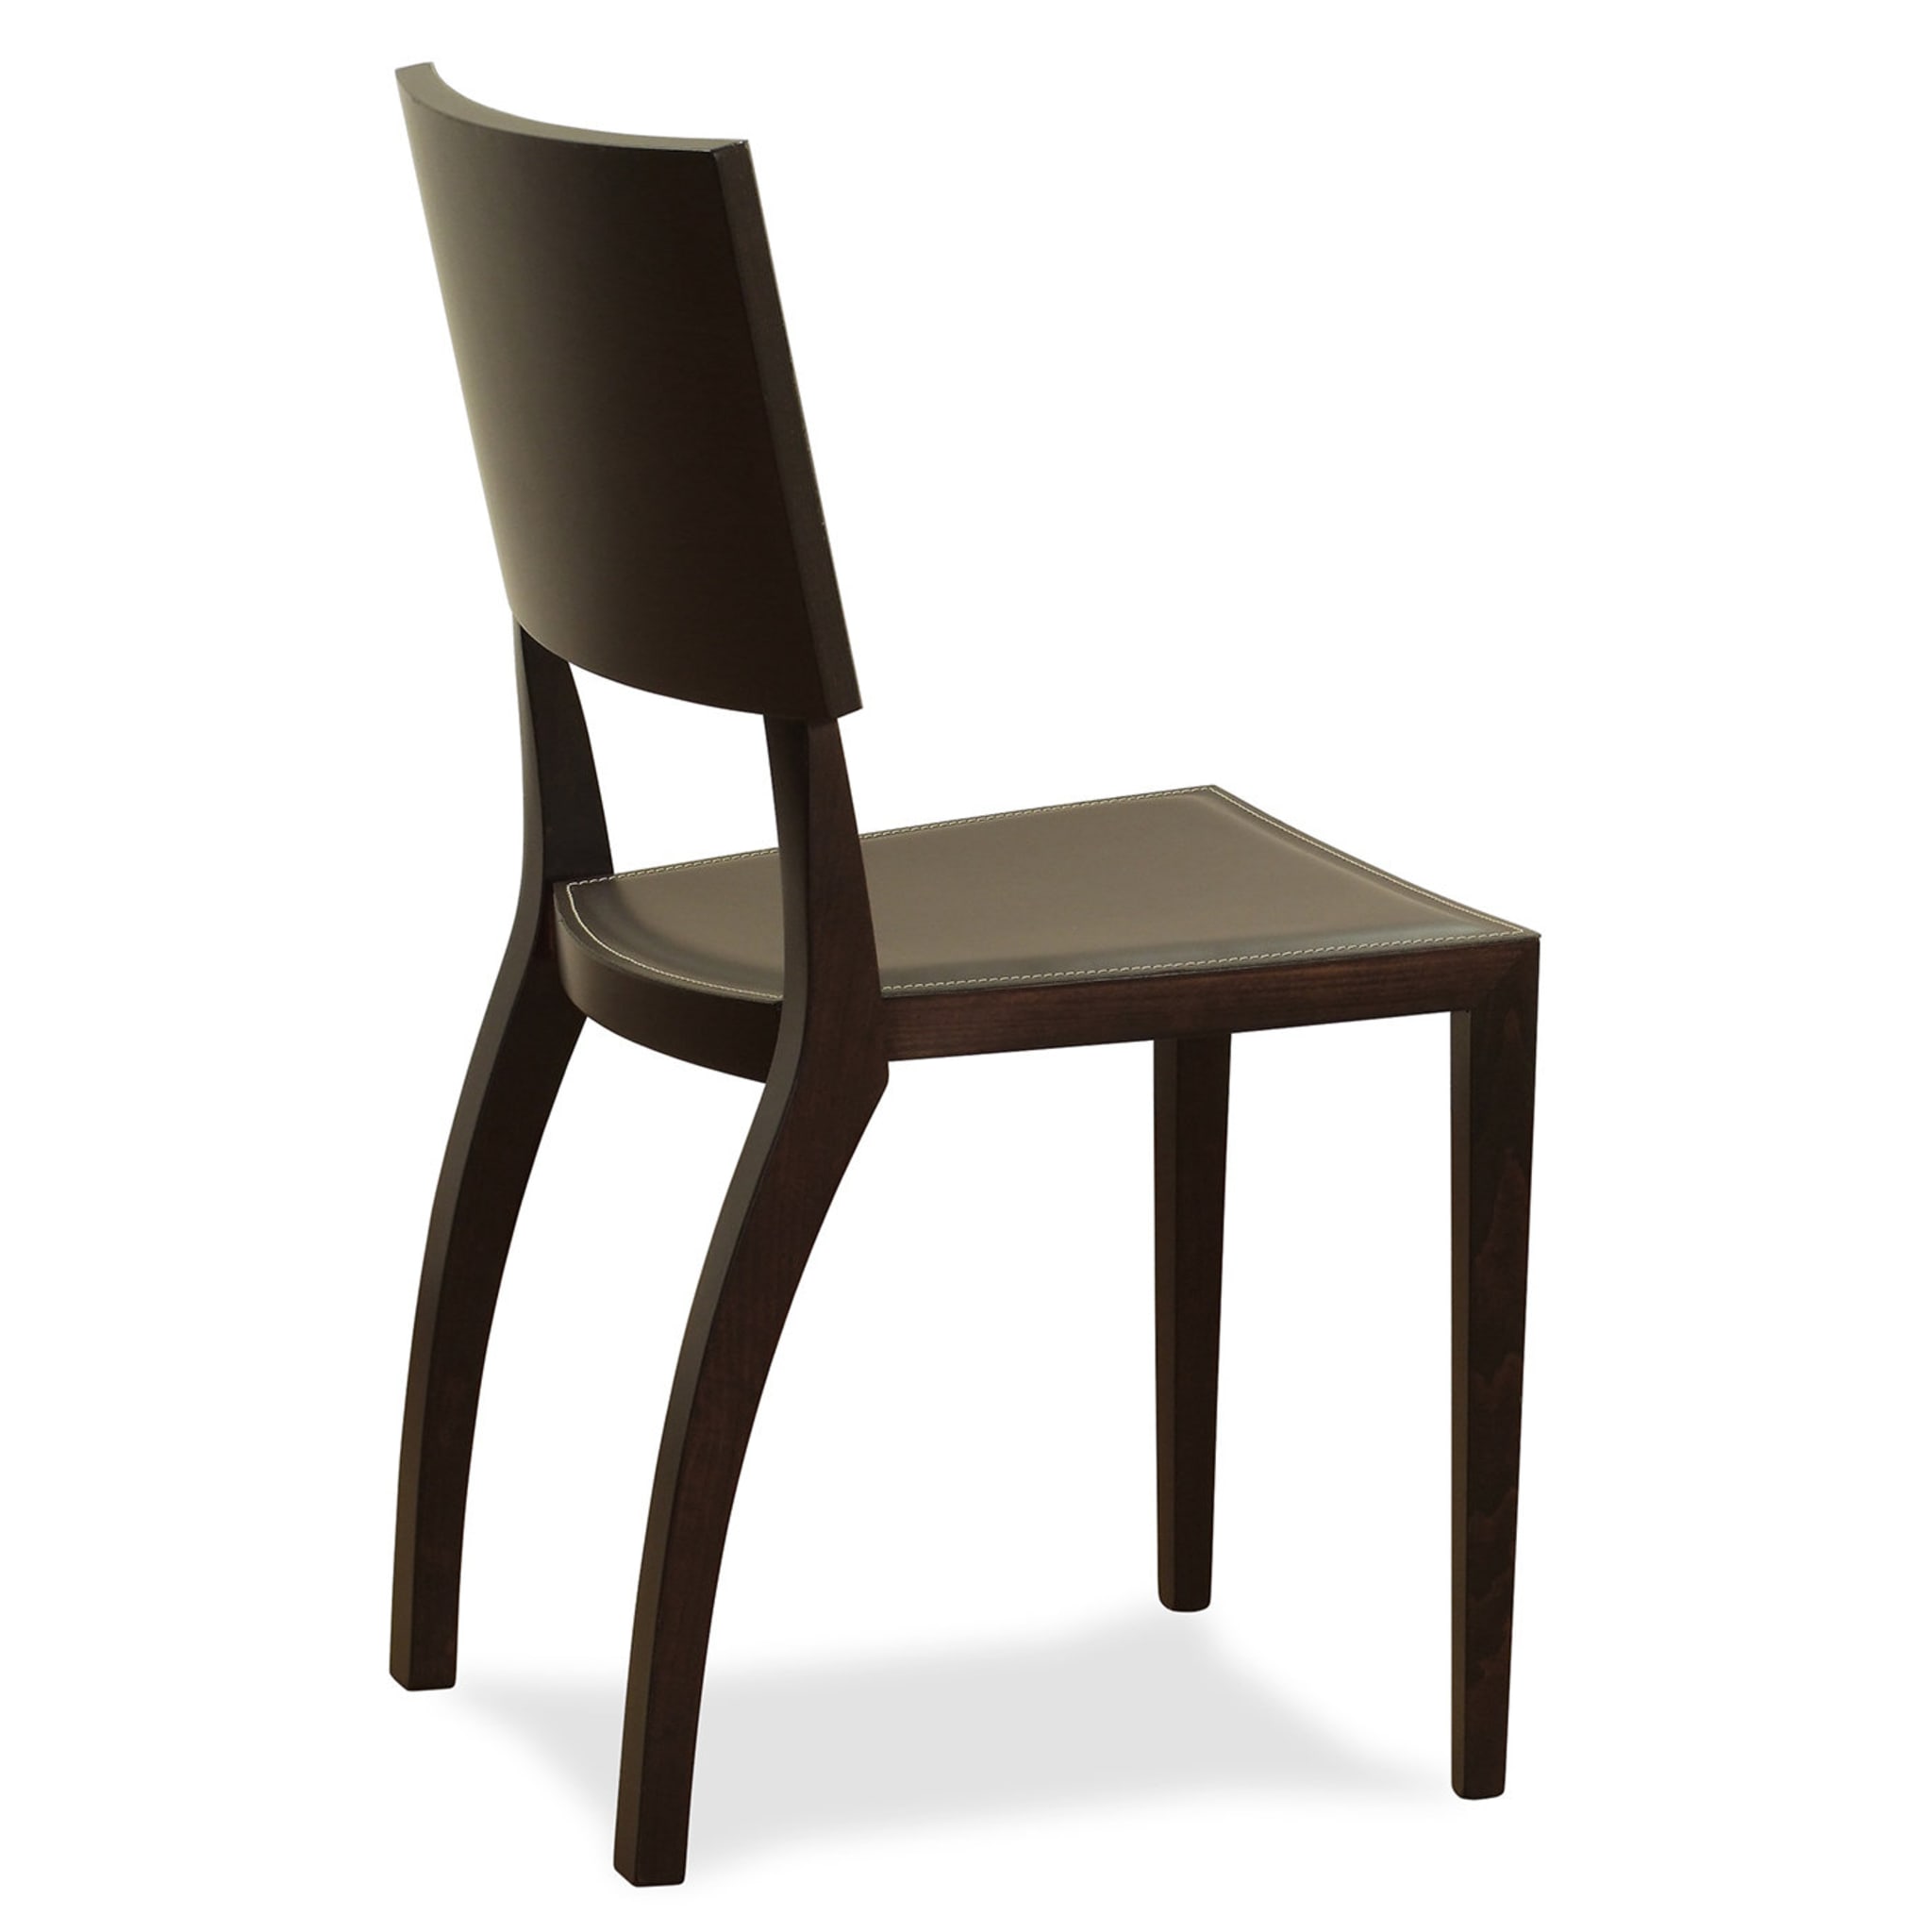 911BPI Set of 2 Chairs - Alternative view 1